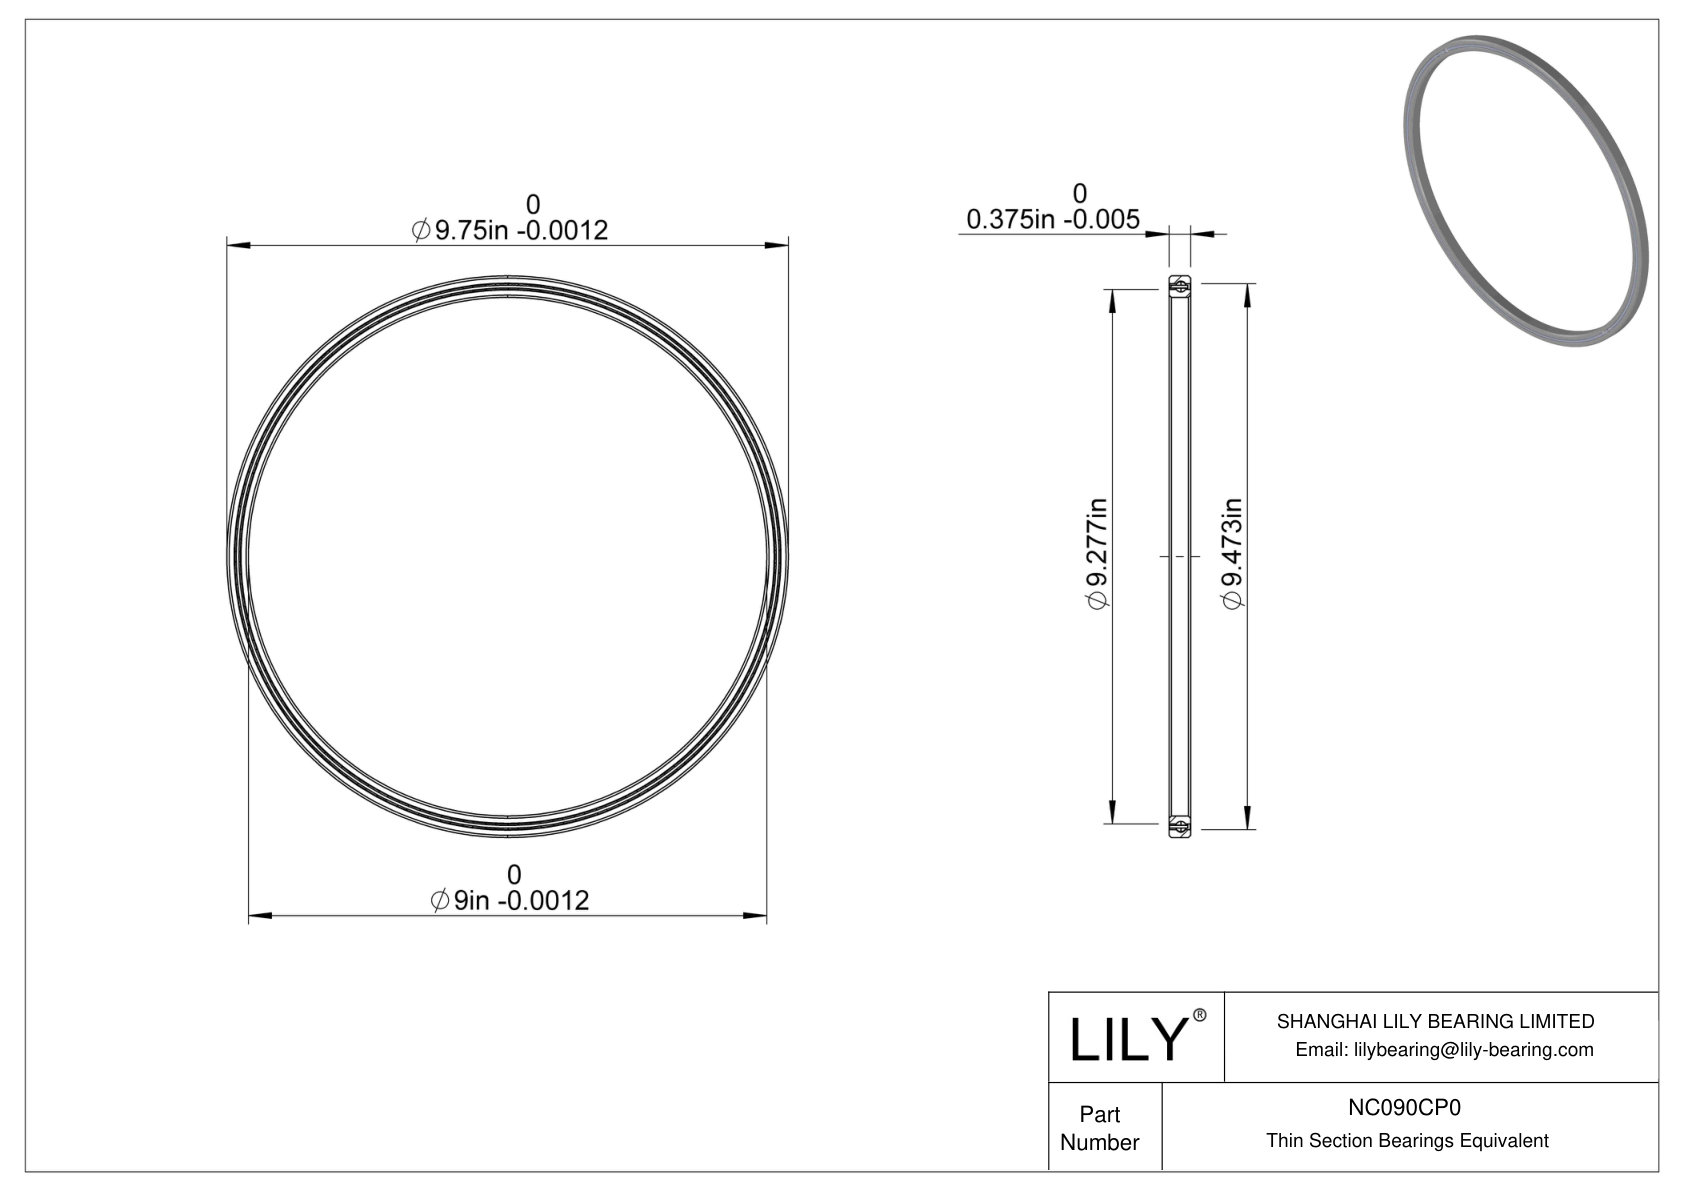 NC090CP0 Constant Section (CS) Bearings cad drawing